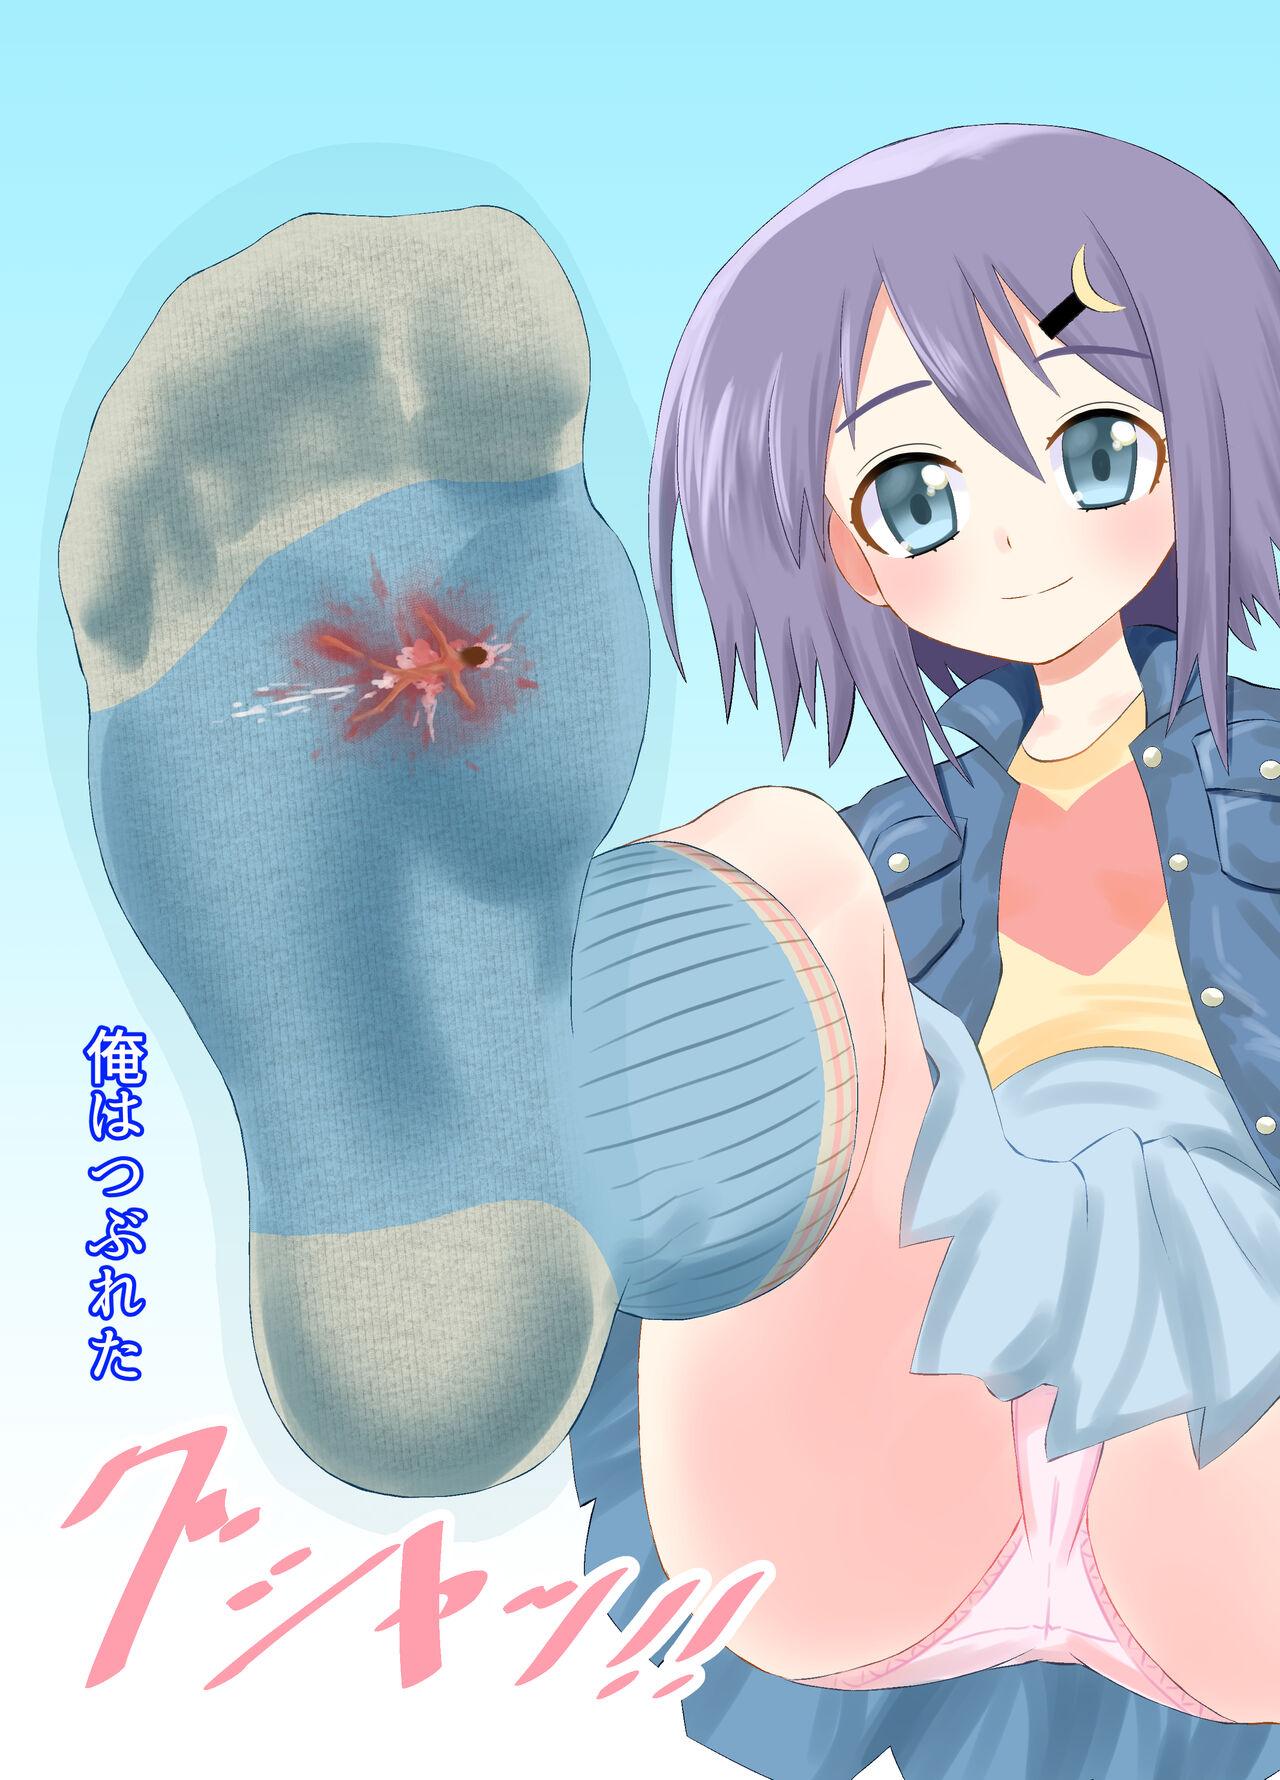 A CG collection of getting smaller and being stepped on by a girl 39